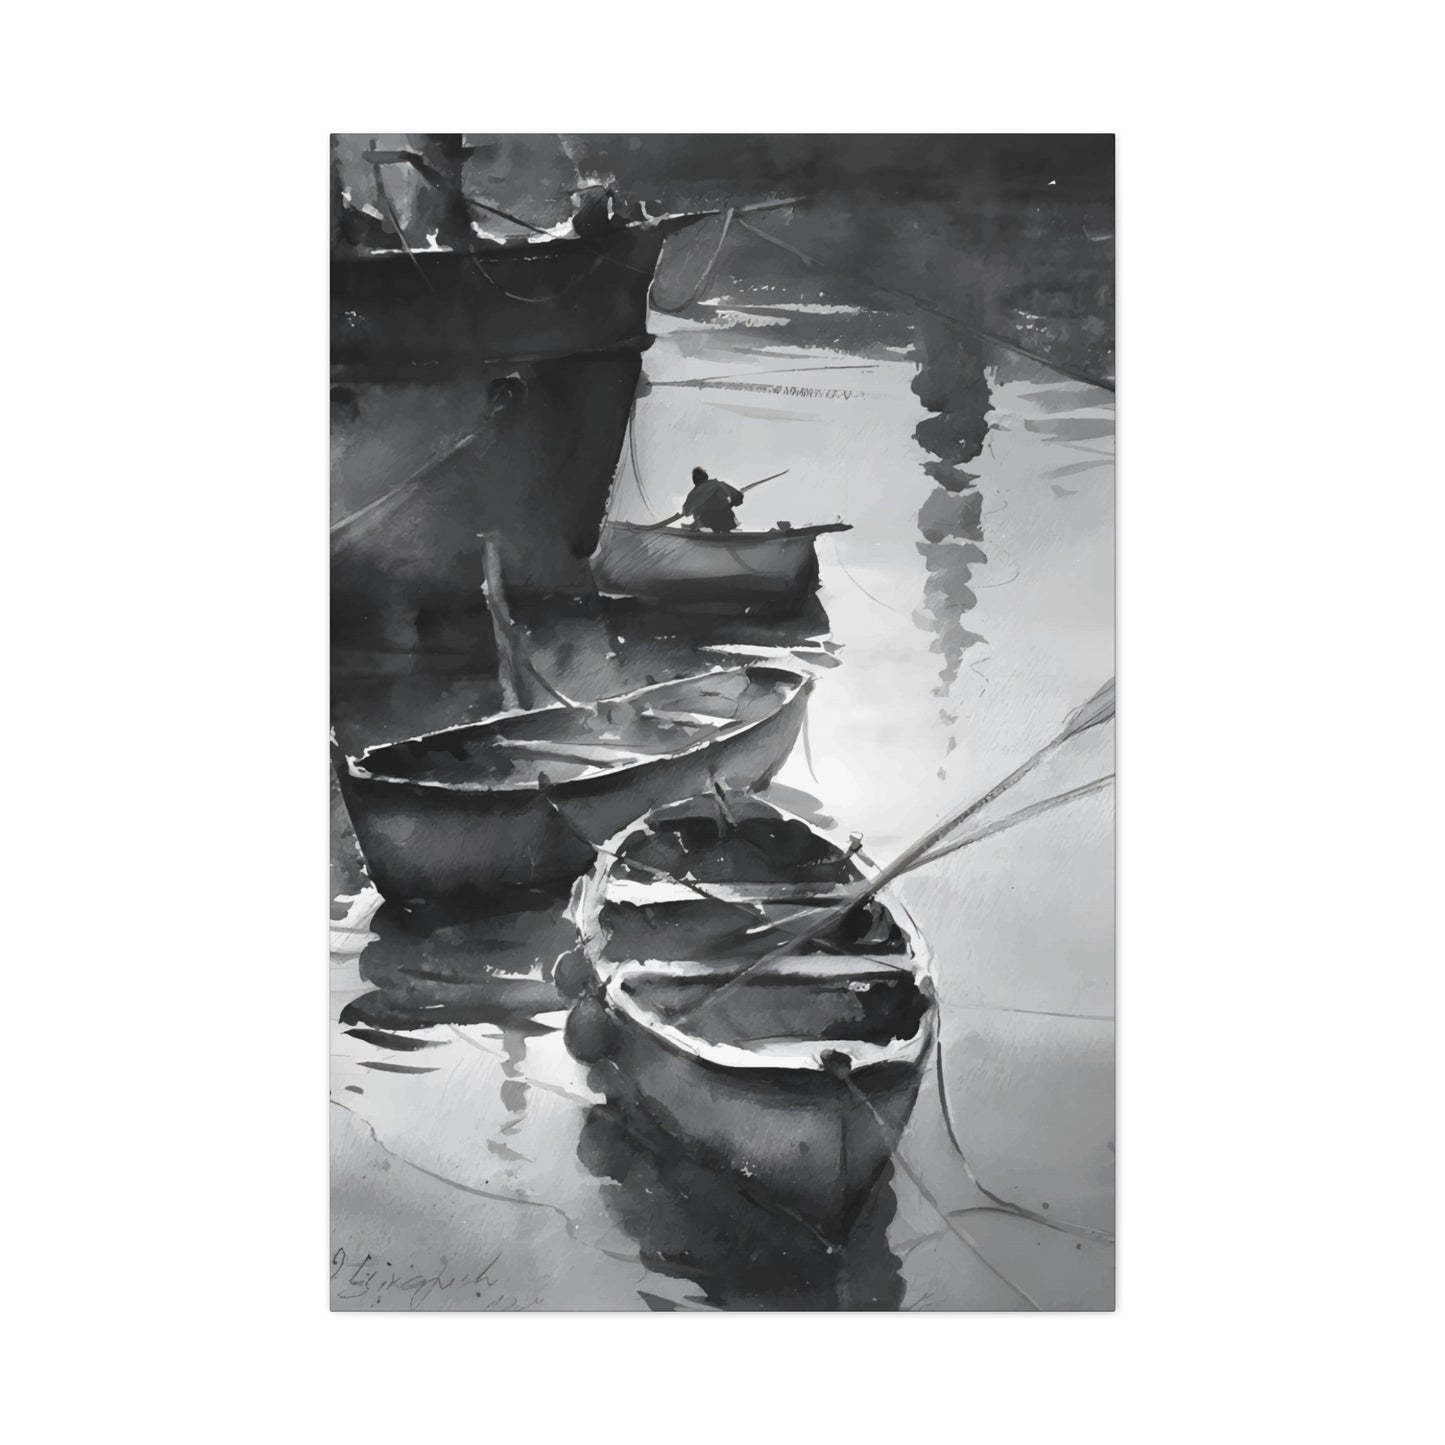 Boat Oil Painting Wall Art & Canvas Prints